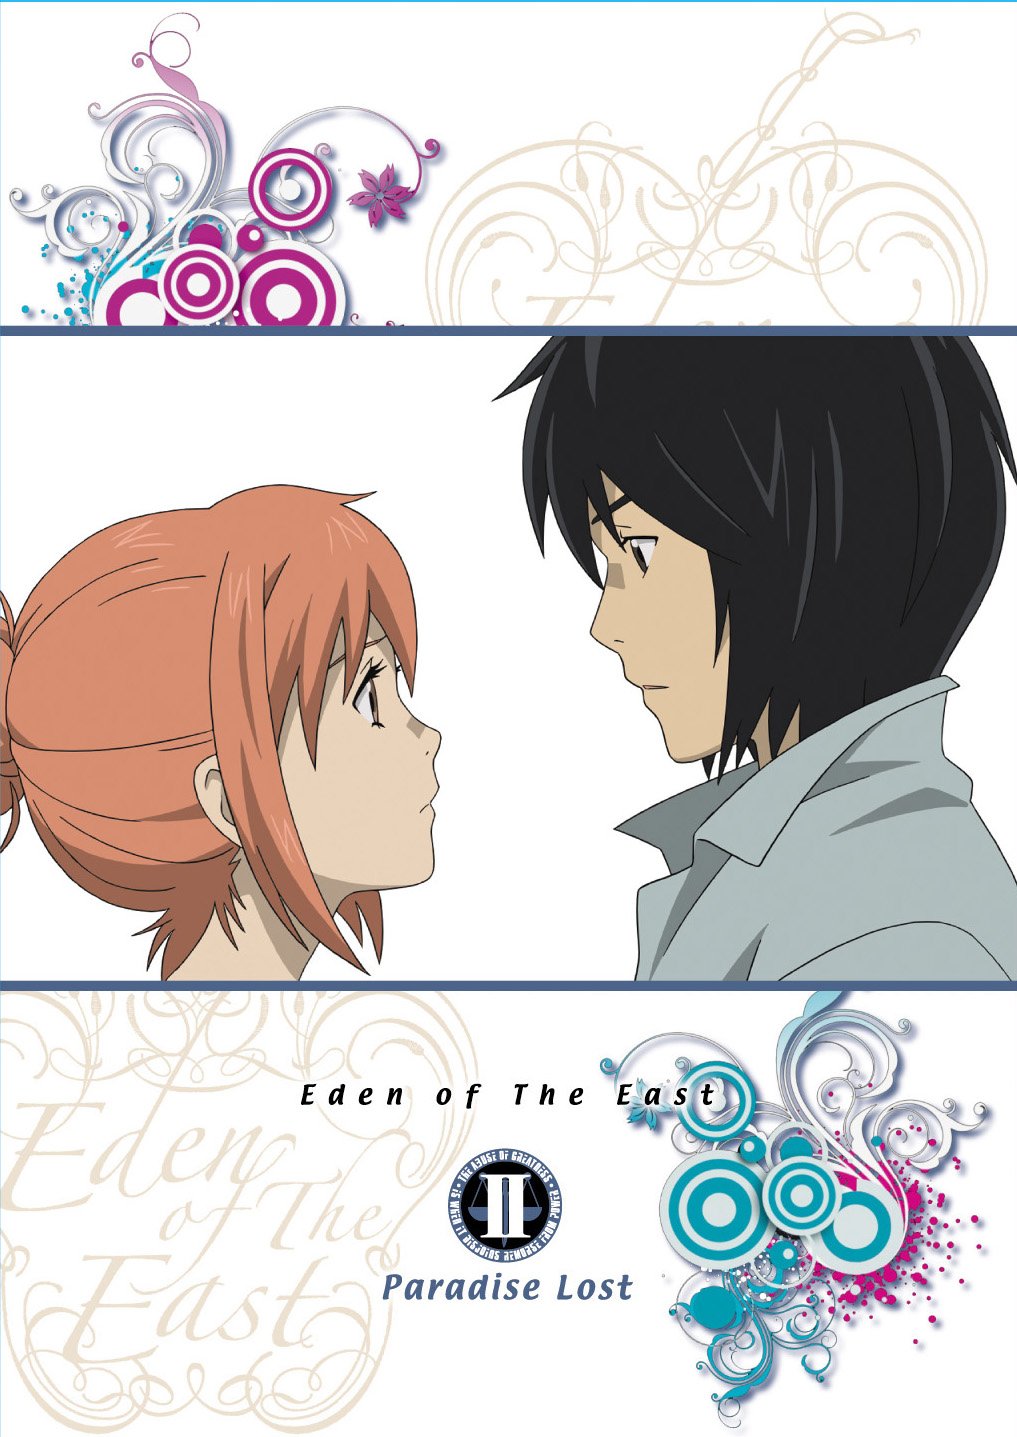 Eden Of The East Paradise Lost Eden Of The East Wiki Fandom